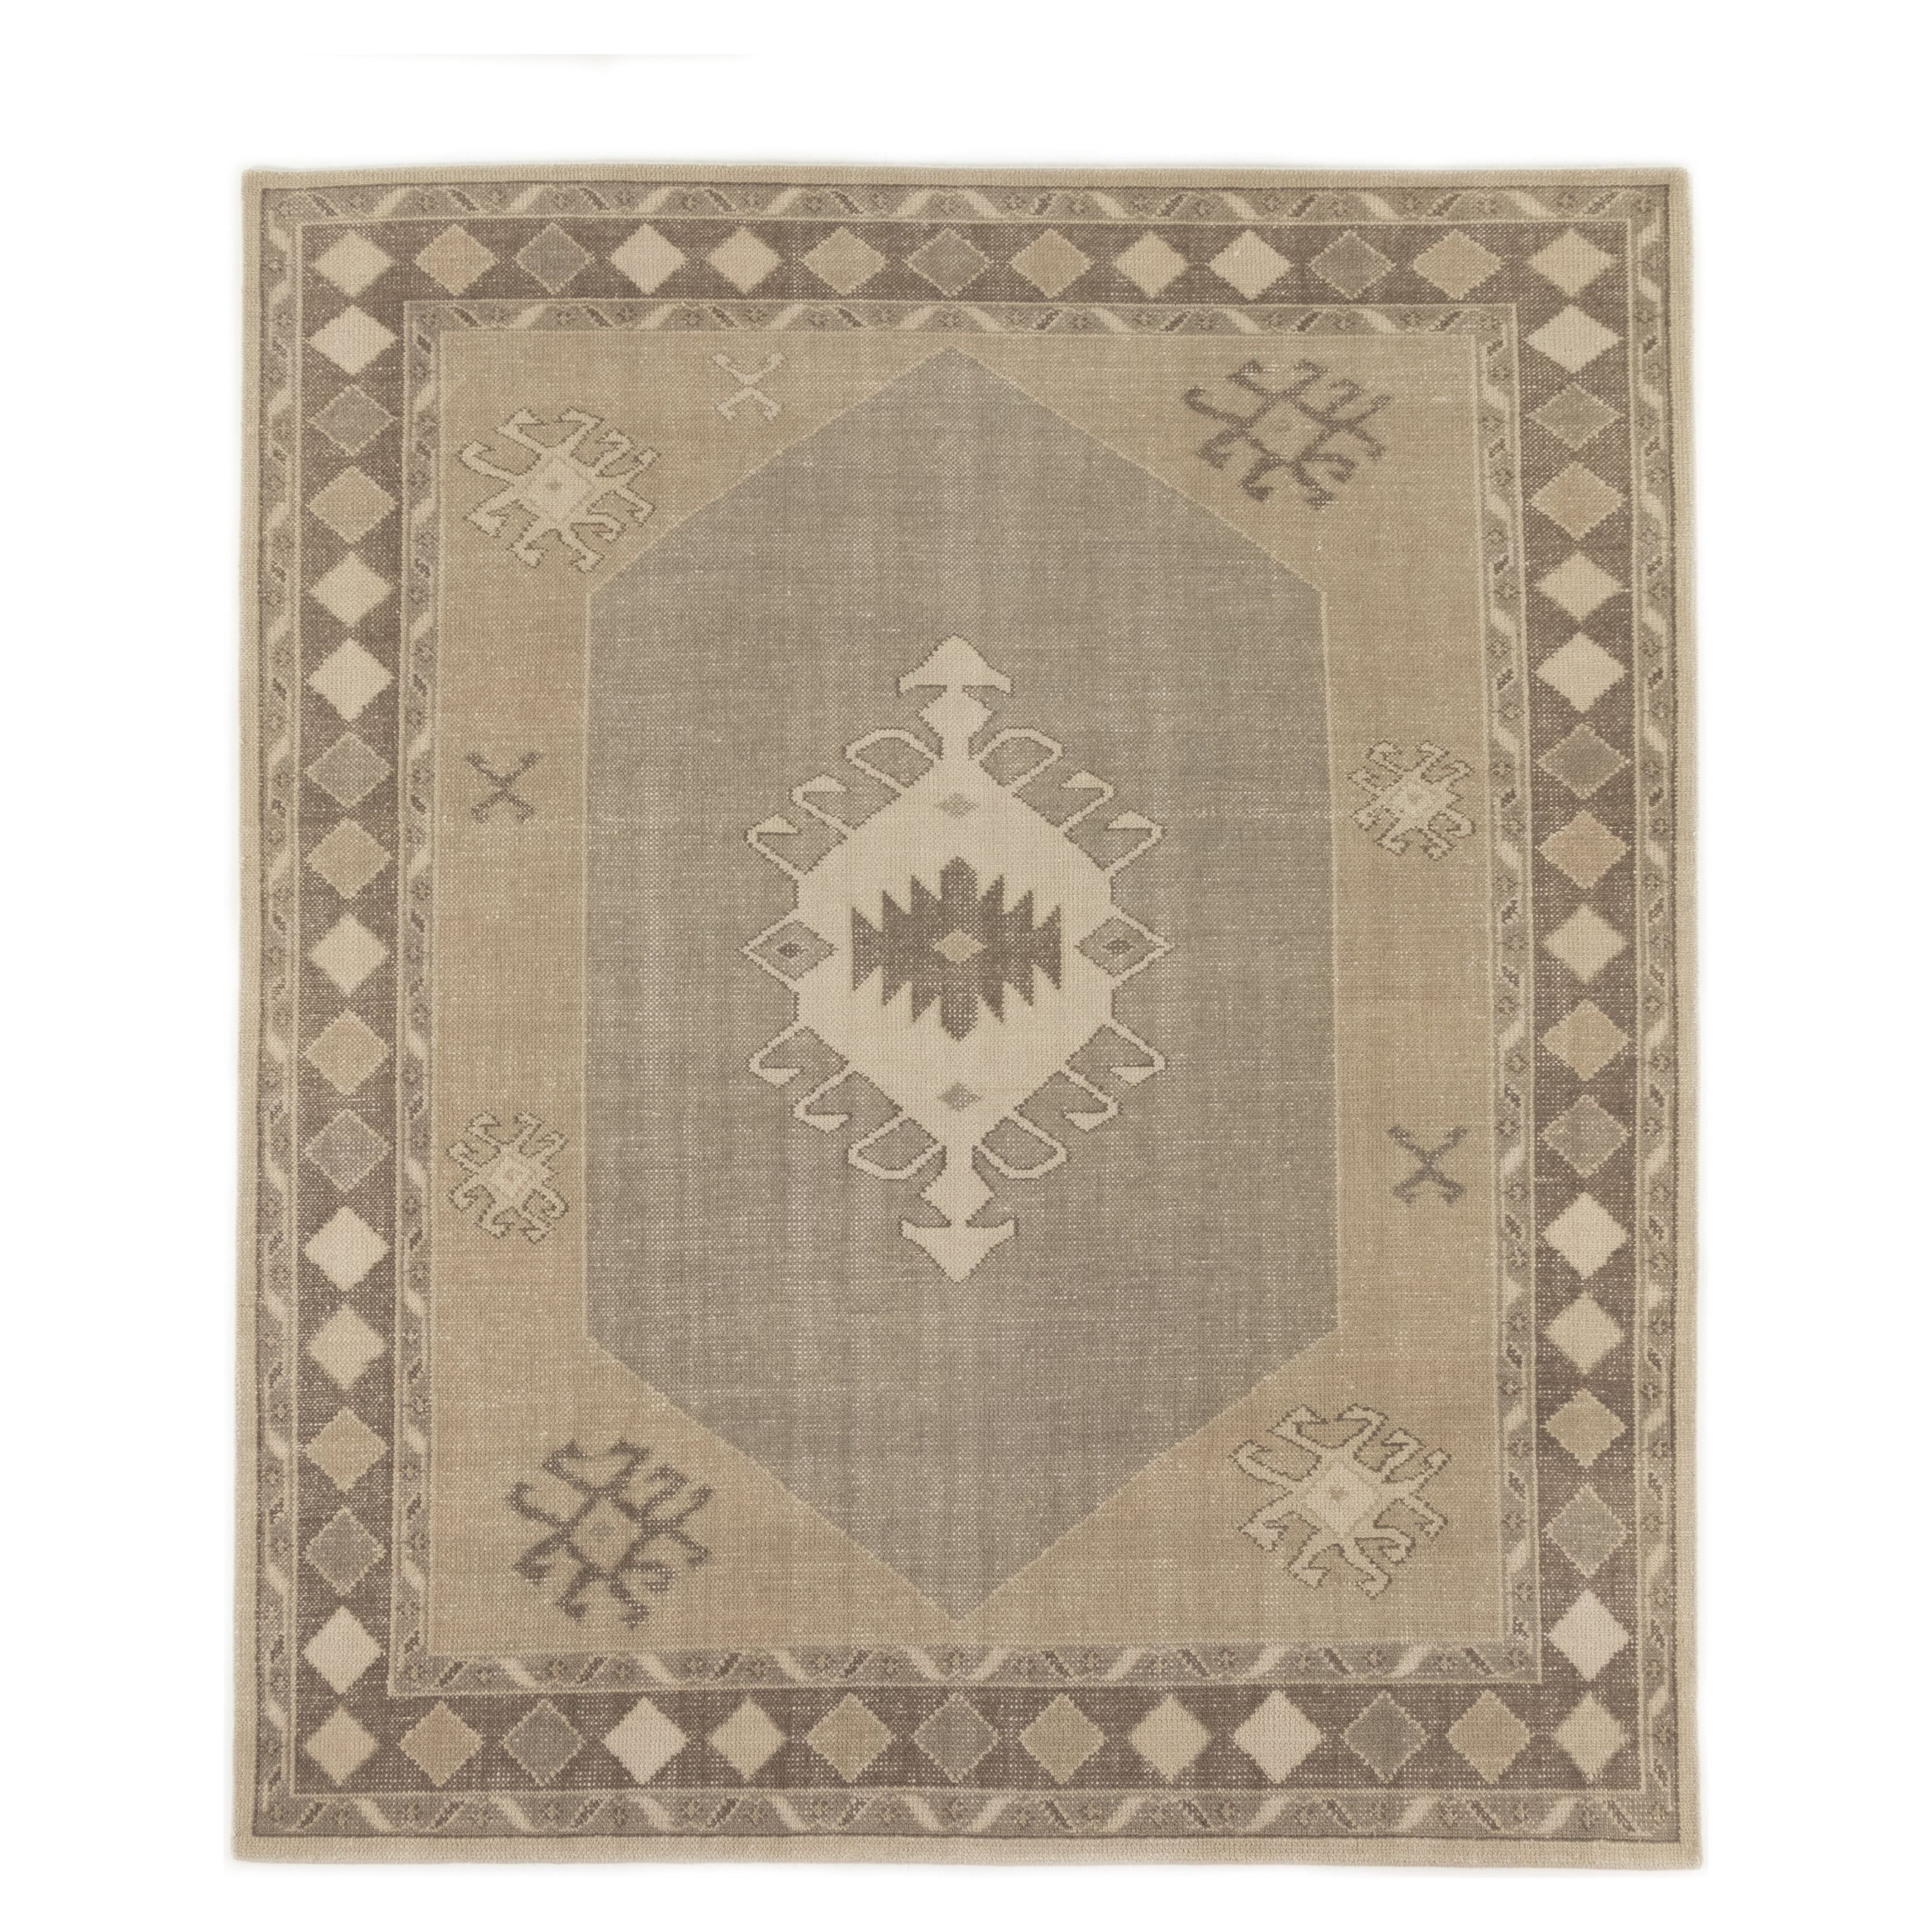 The Samsa Rug is made from a beautiful blend of classic cotton and luxurious New Zealand wool, with unique, intricate motifs that seem to speak a story all their own. Amethyst Home provides interior design services, furniture, rugs, and lighting in the Calabasas metro area.